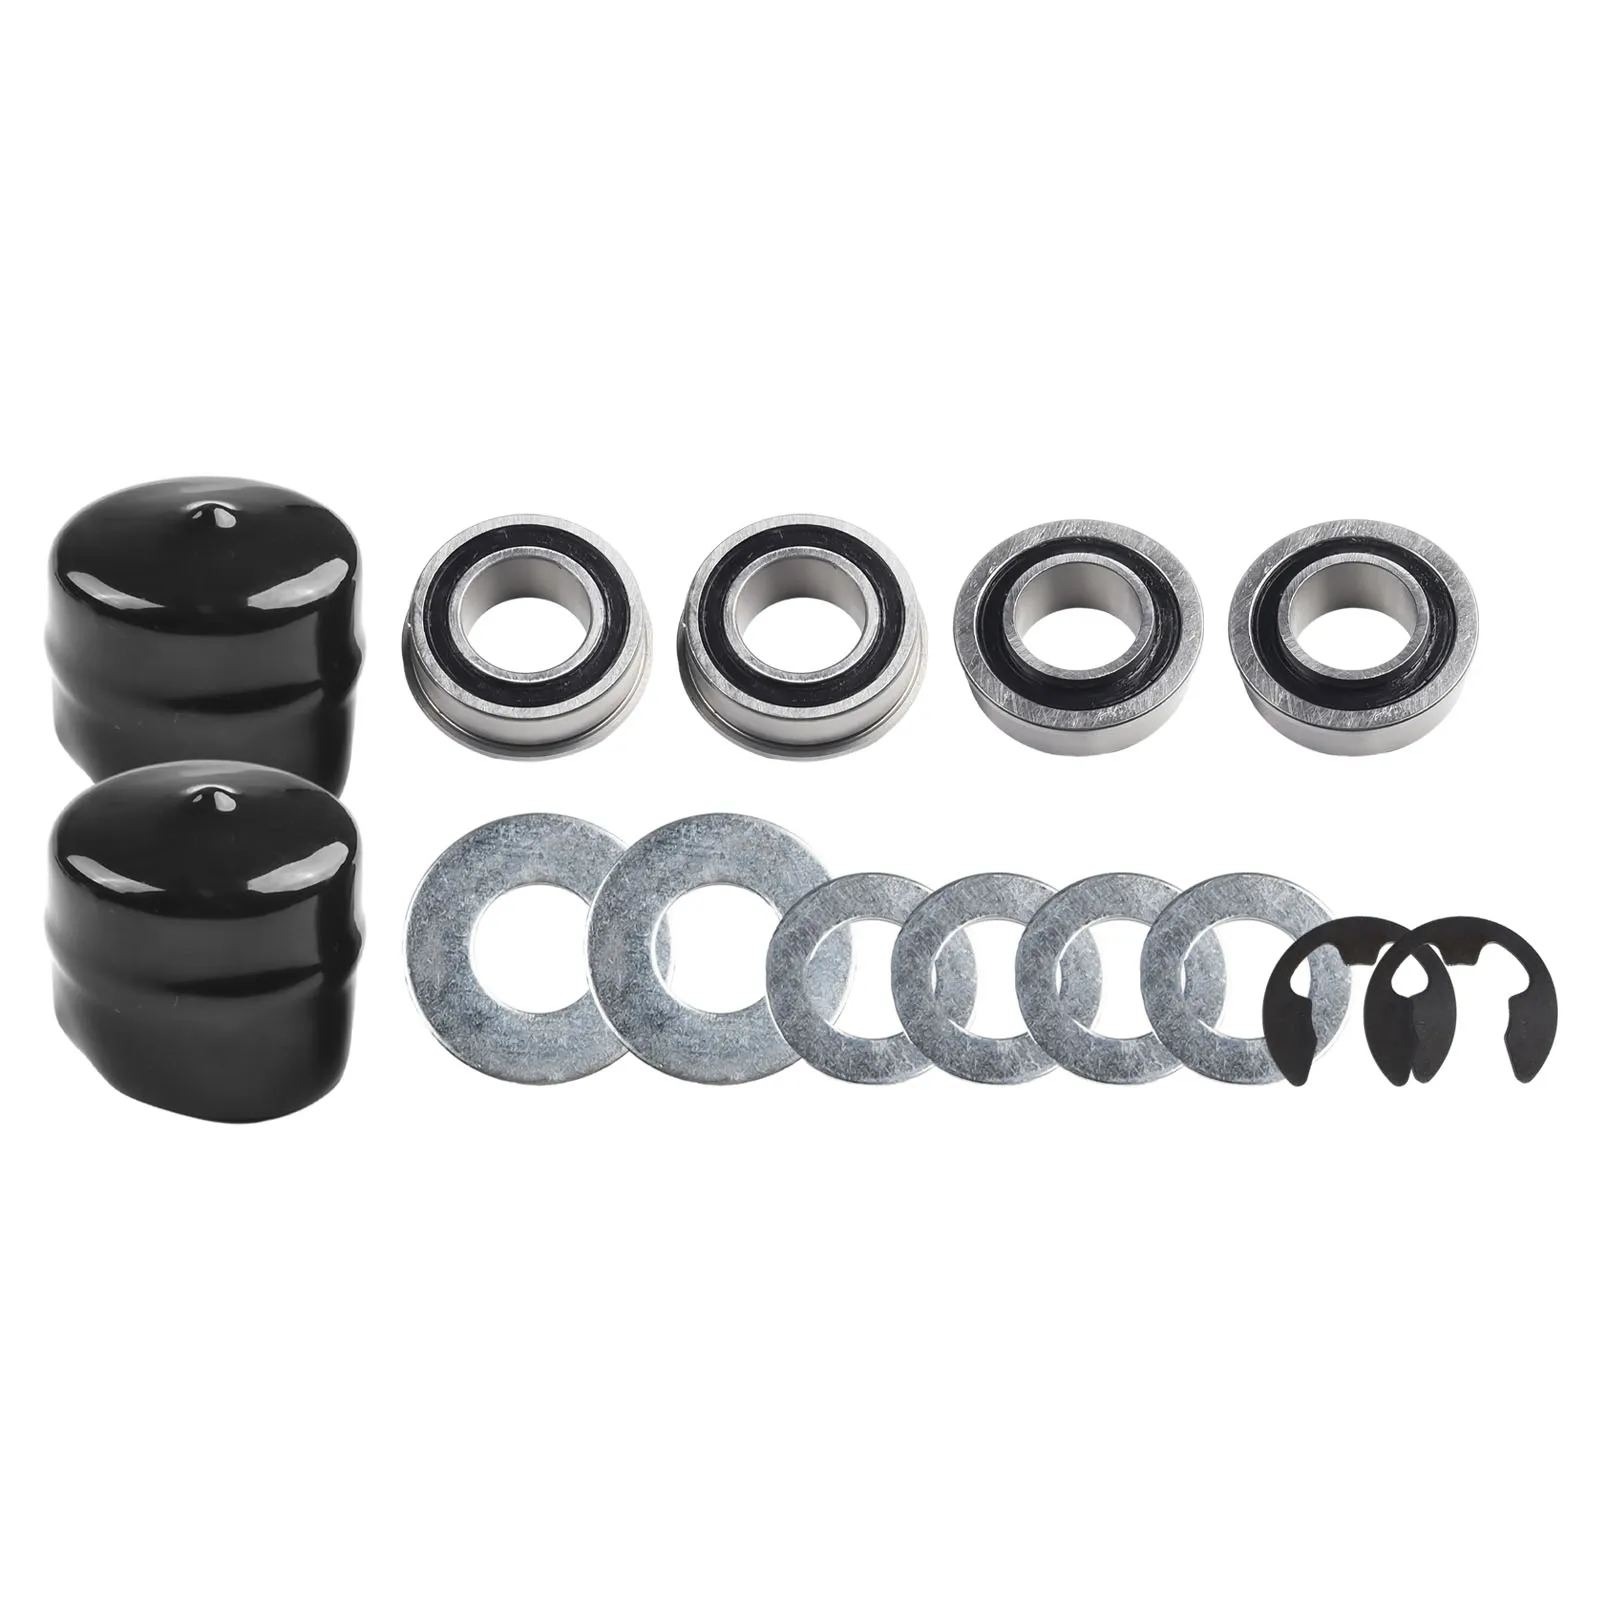 

Power Equipment Tool Parts Garden Tool Conversion Kit For 9040-H Accessories Bushing To Bearing Conversion Kits